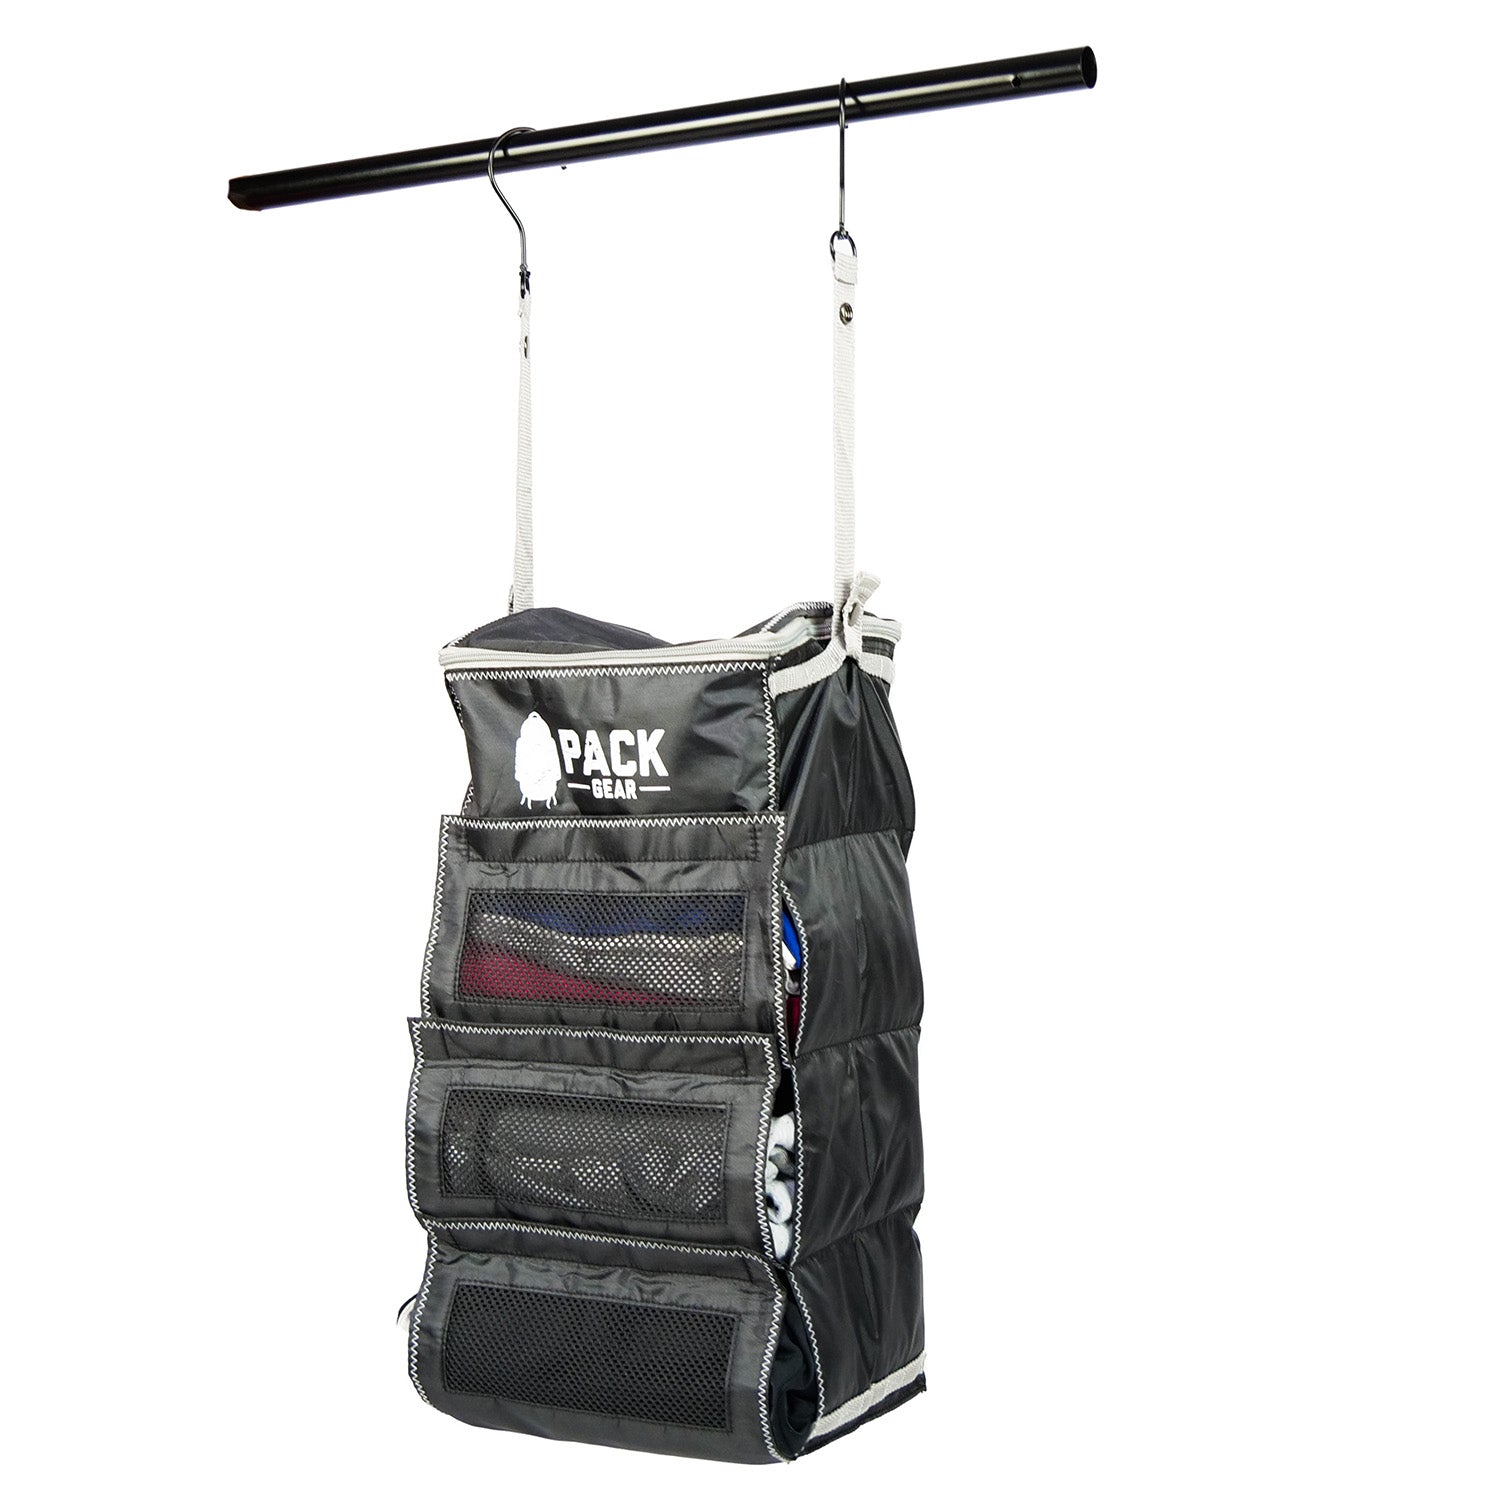 Suitcase Organizer, Pack More in your Luggage or Backpack